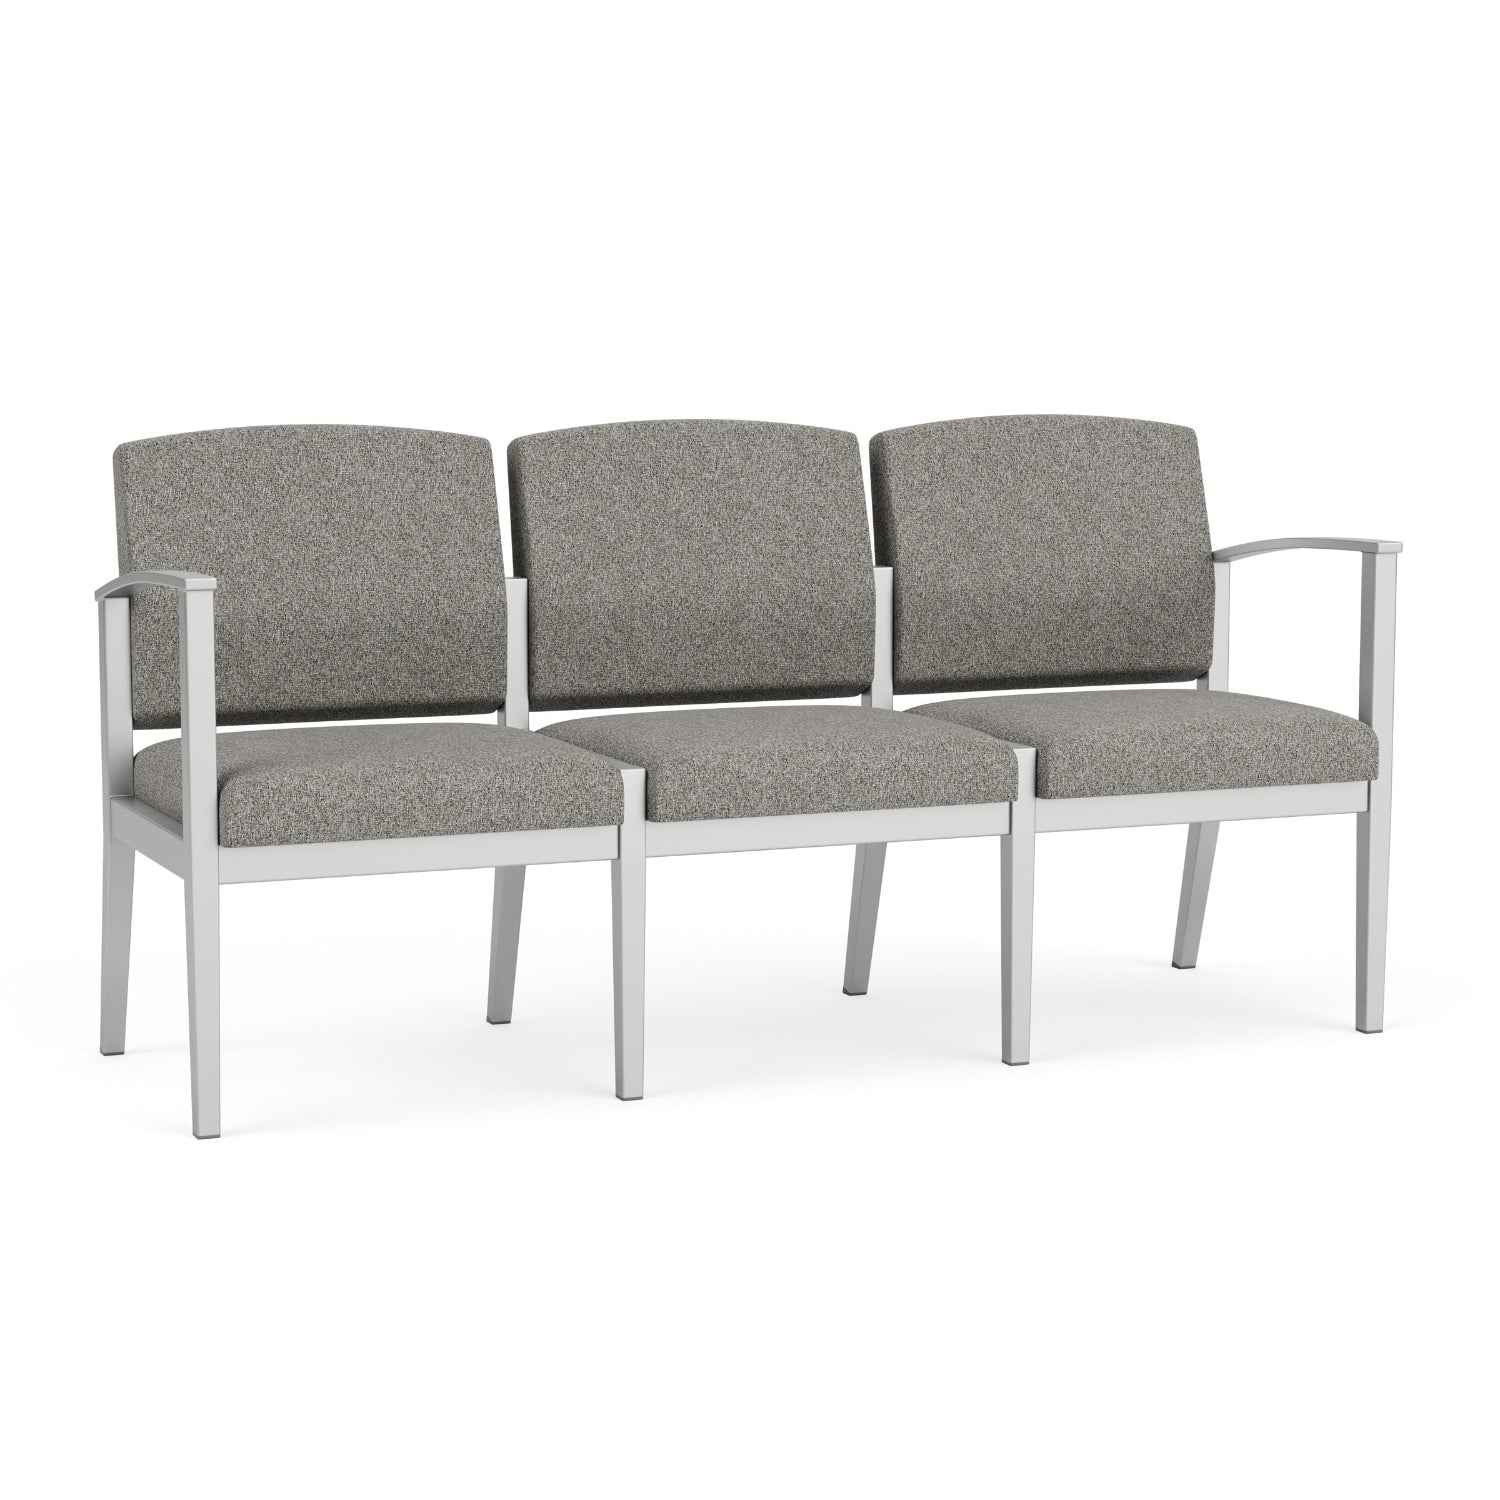 Amherst Steel Collection Reception Seating, 3-Seat Sofa, Standard Fabric Upholstery, FREE SHIPPING